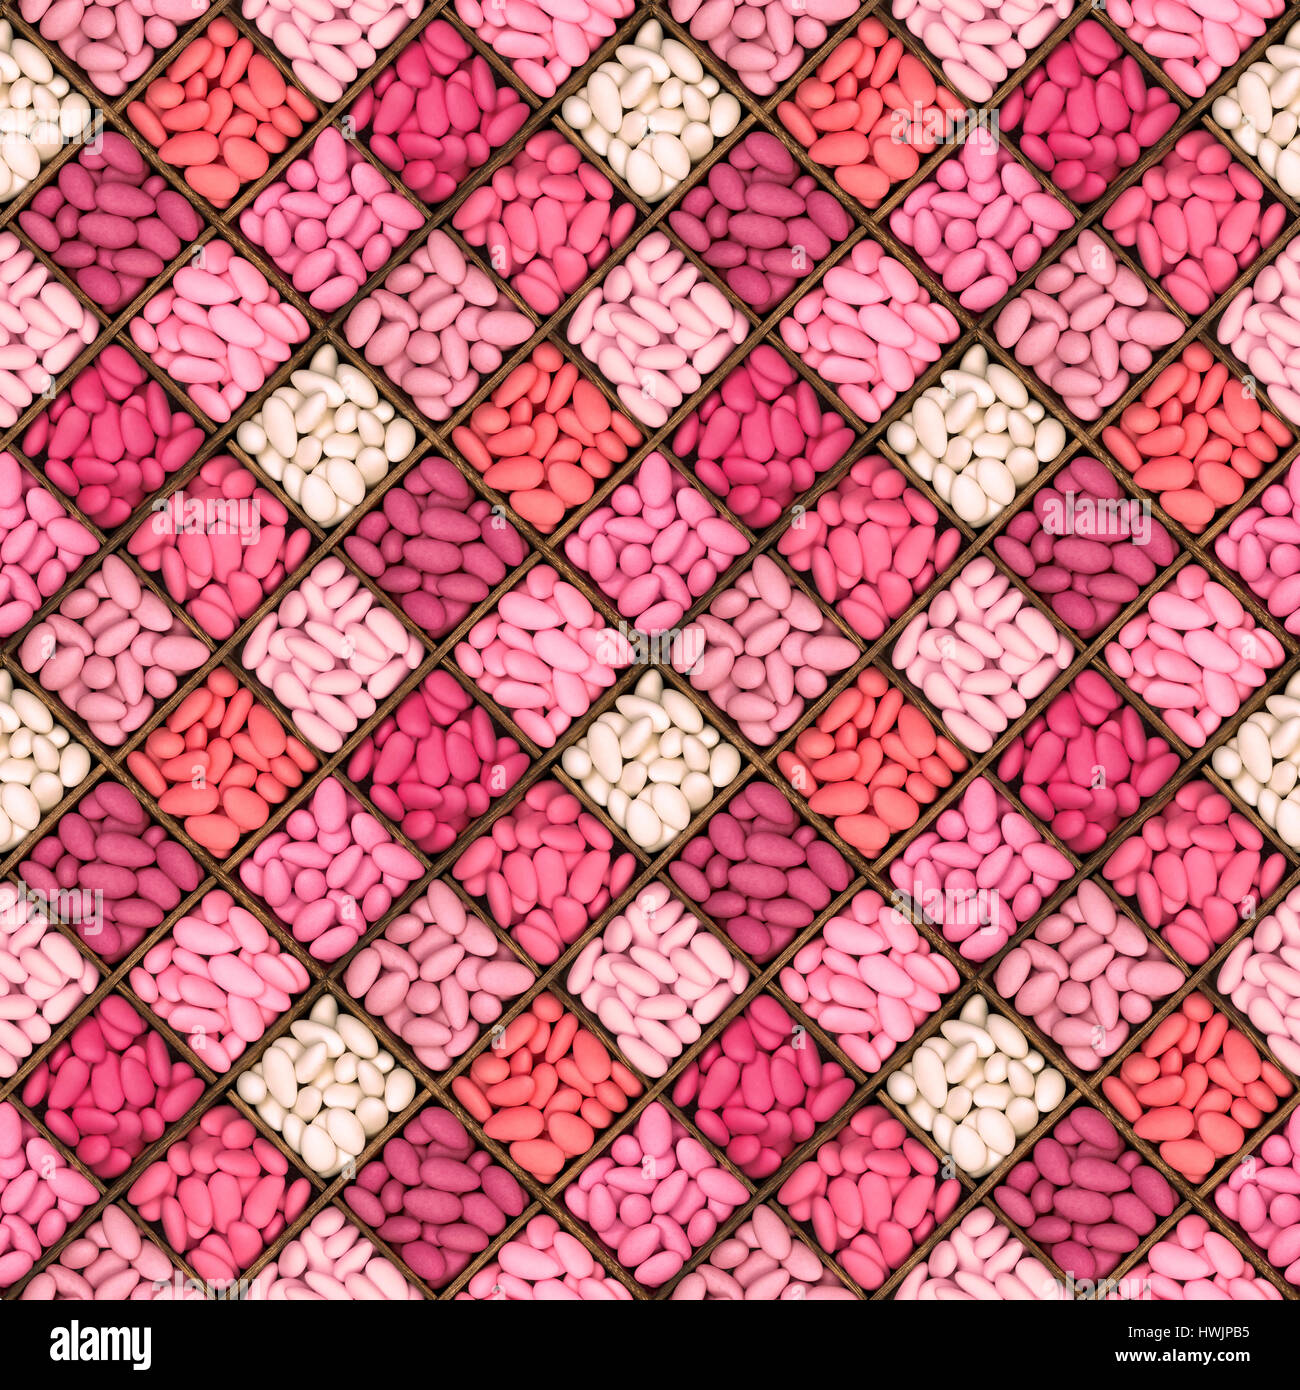 A seamless pattern of a square wooden storage box with nine compartments, filled with a selection of sugared almonds in shades of pink. These bitter s Stock Photo